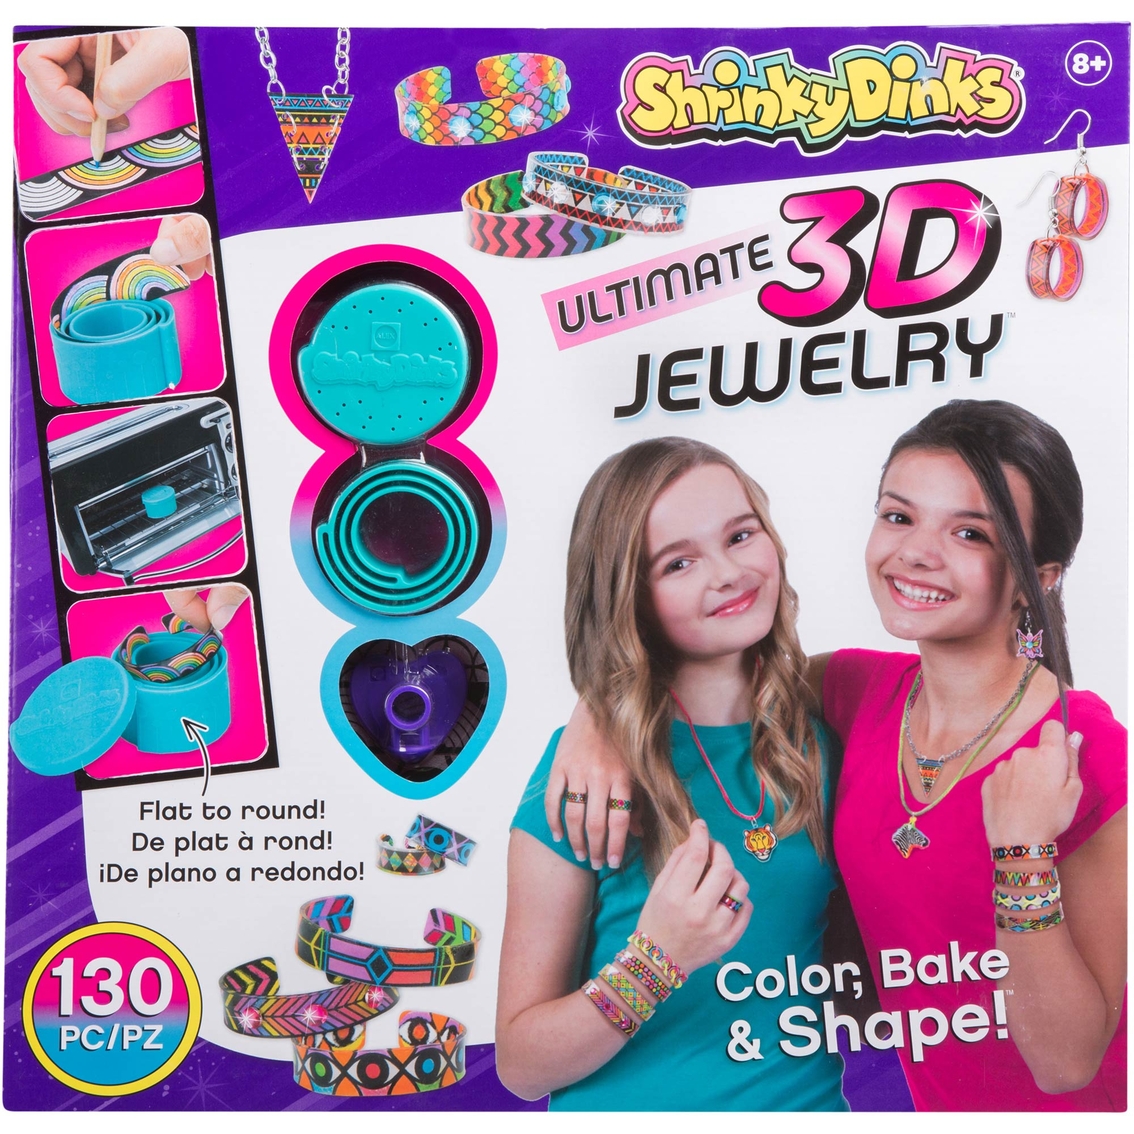 Shrinky Dinks Out of This World Arts and Crafts Kit - Just Play